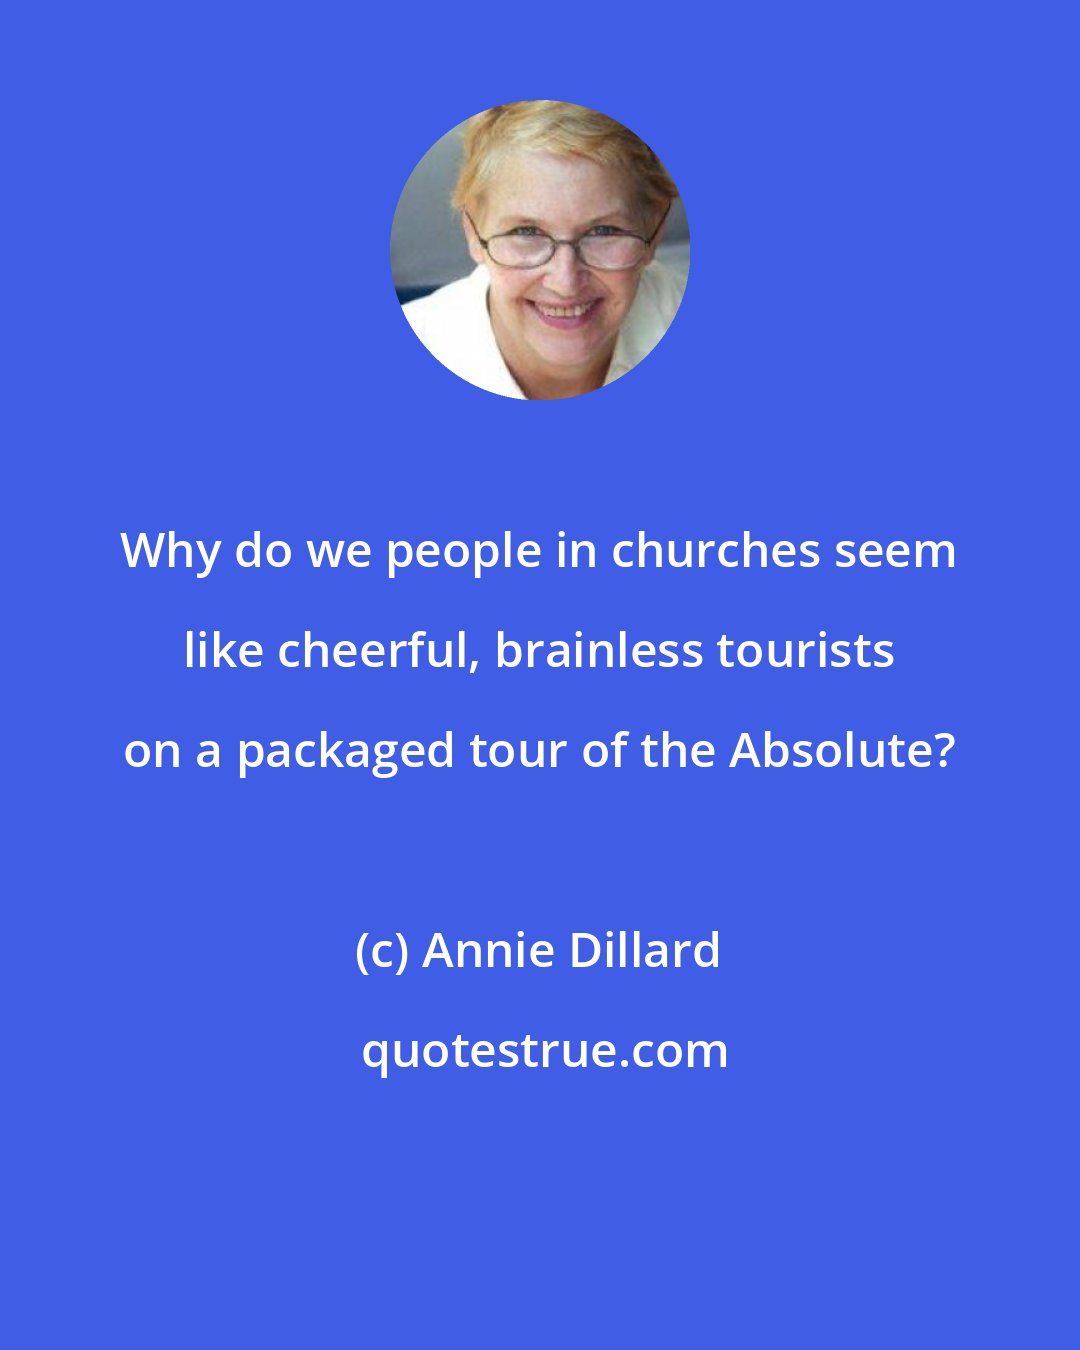 Annie Dillard: Why do we people in churches seem like cheerful, brainless tourists on a packaged tour of the Absolute?